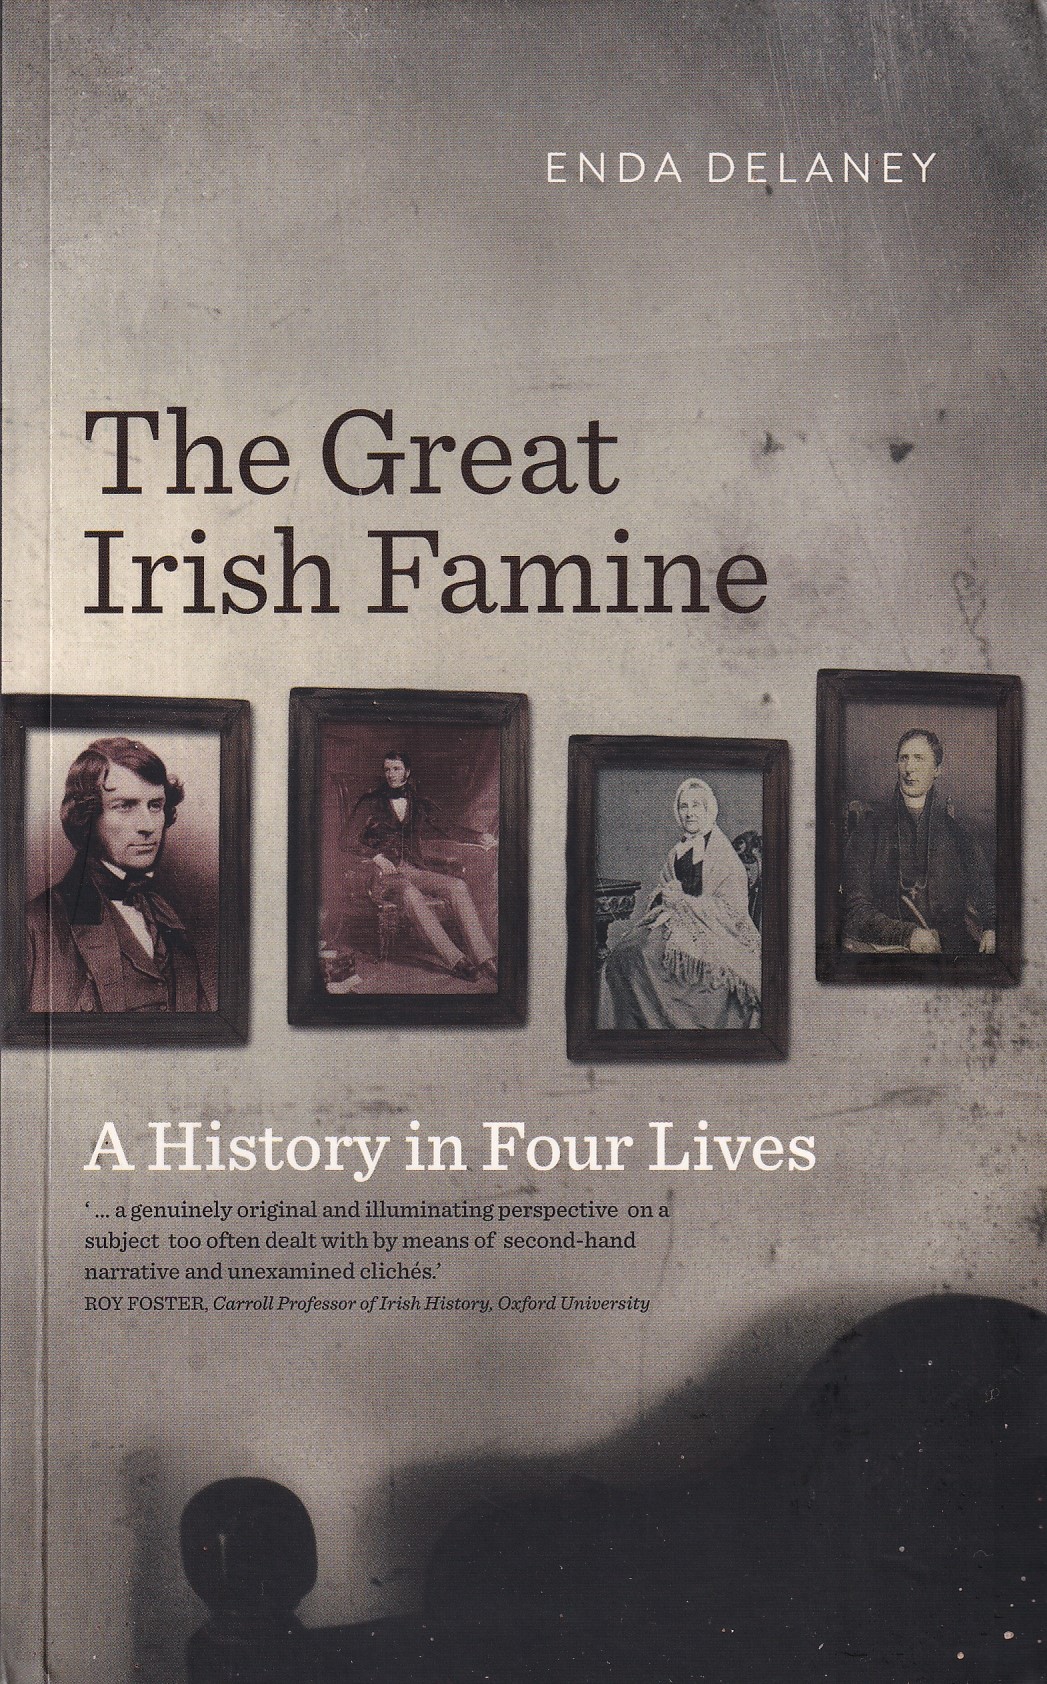 The Great Irish Famine: A History in Four Lives | Enda Delaney | Charlie Byrne's